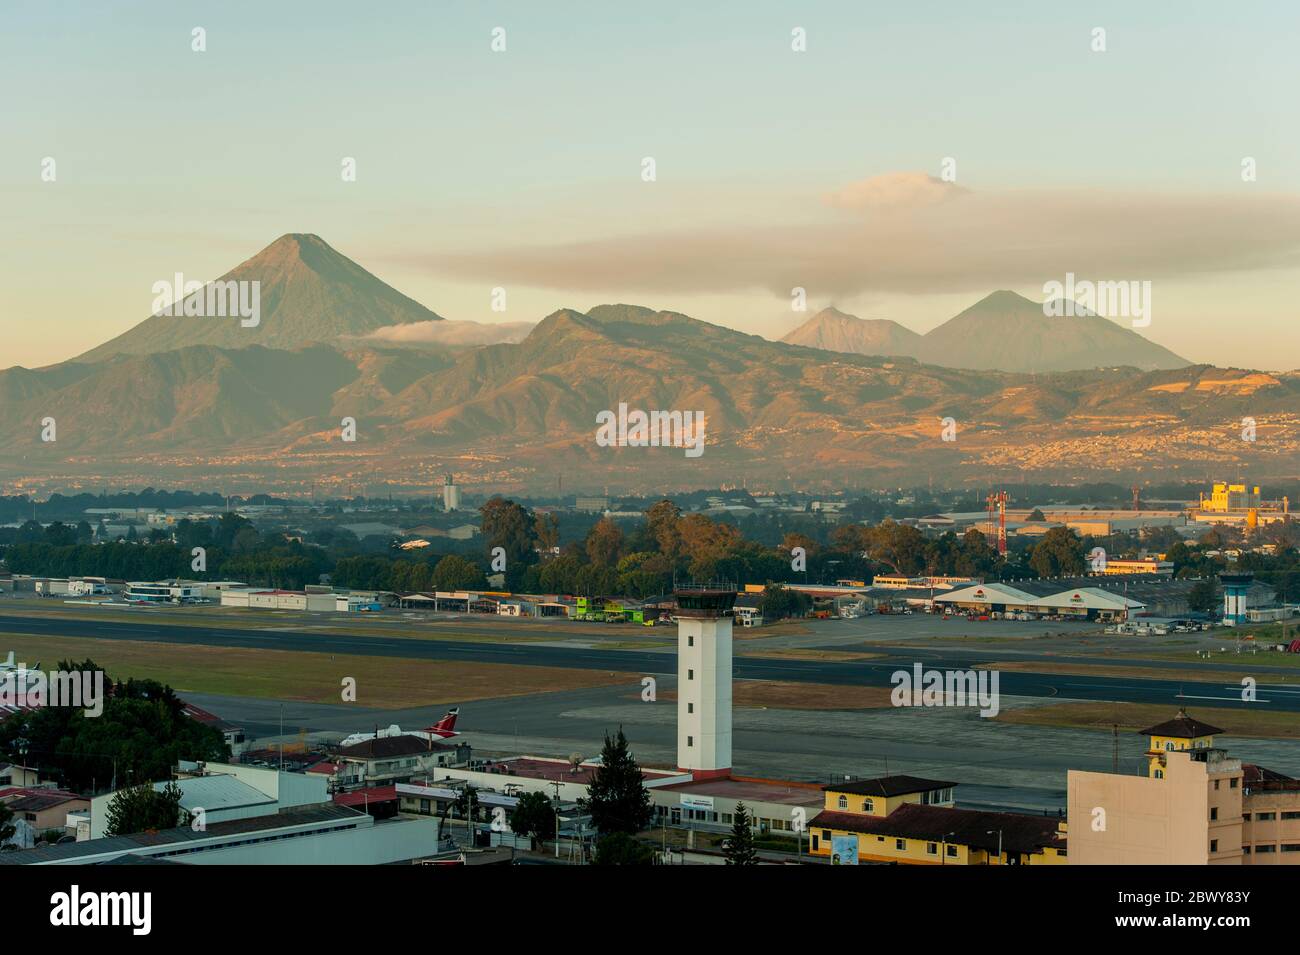 View of La Aurora International Airport in Guatemala City in Guatemala with the Agua volcano in the background. Stock Photo